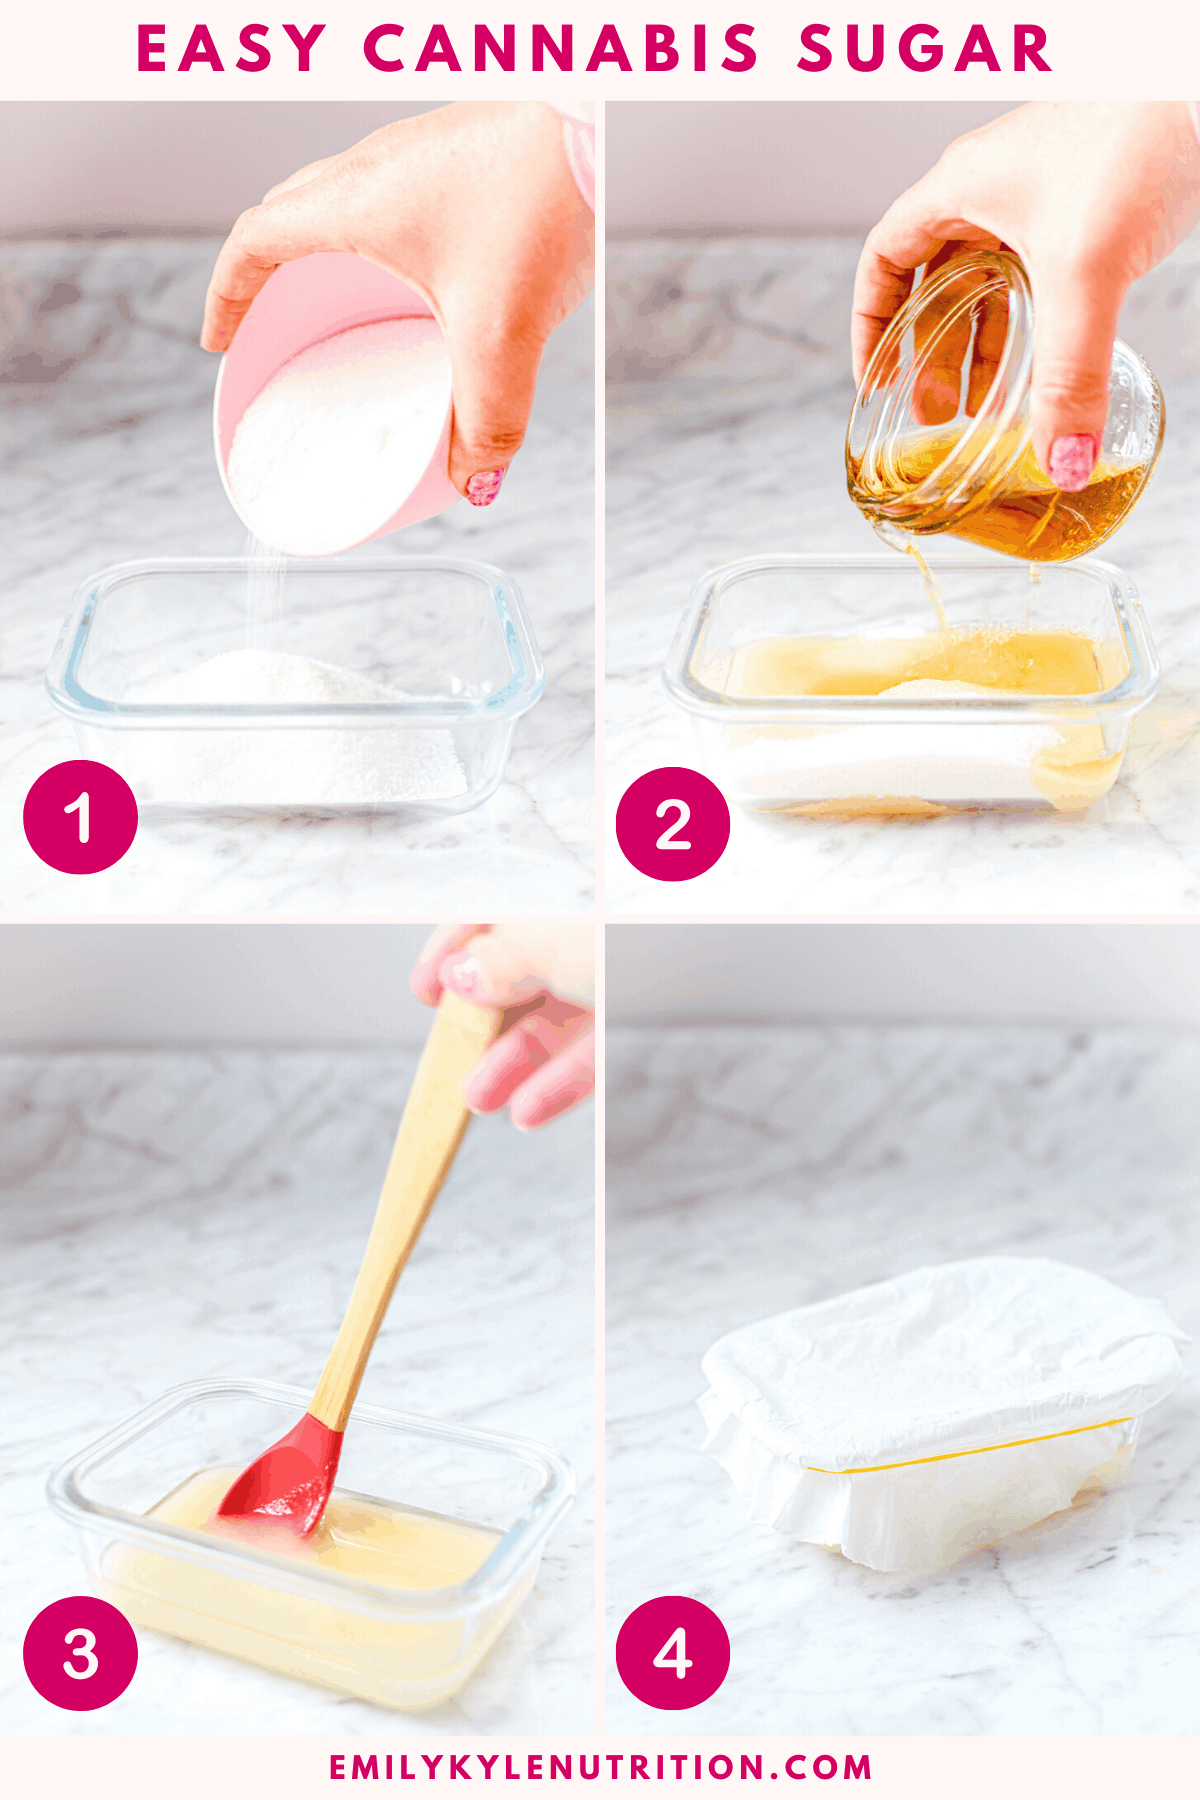 A four step image collage showing the first four steps to making cannabis sugar including pouring the sugar in a glass container, pouring the tincture over the sugar stirring well, and covering with a breathable fabric.